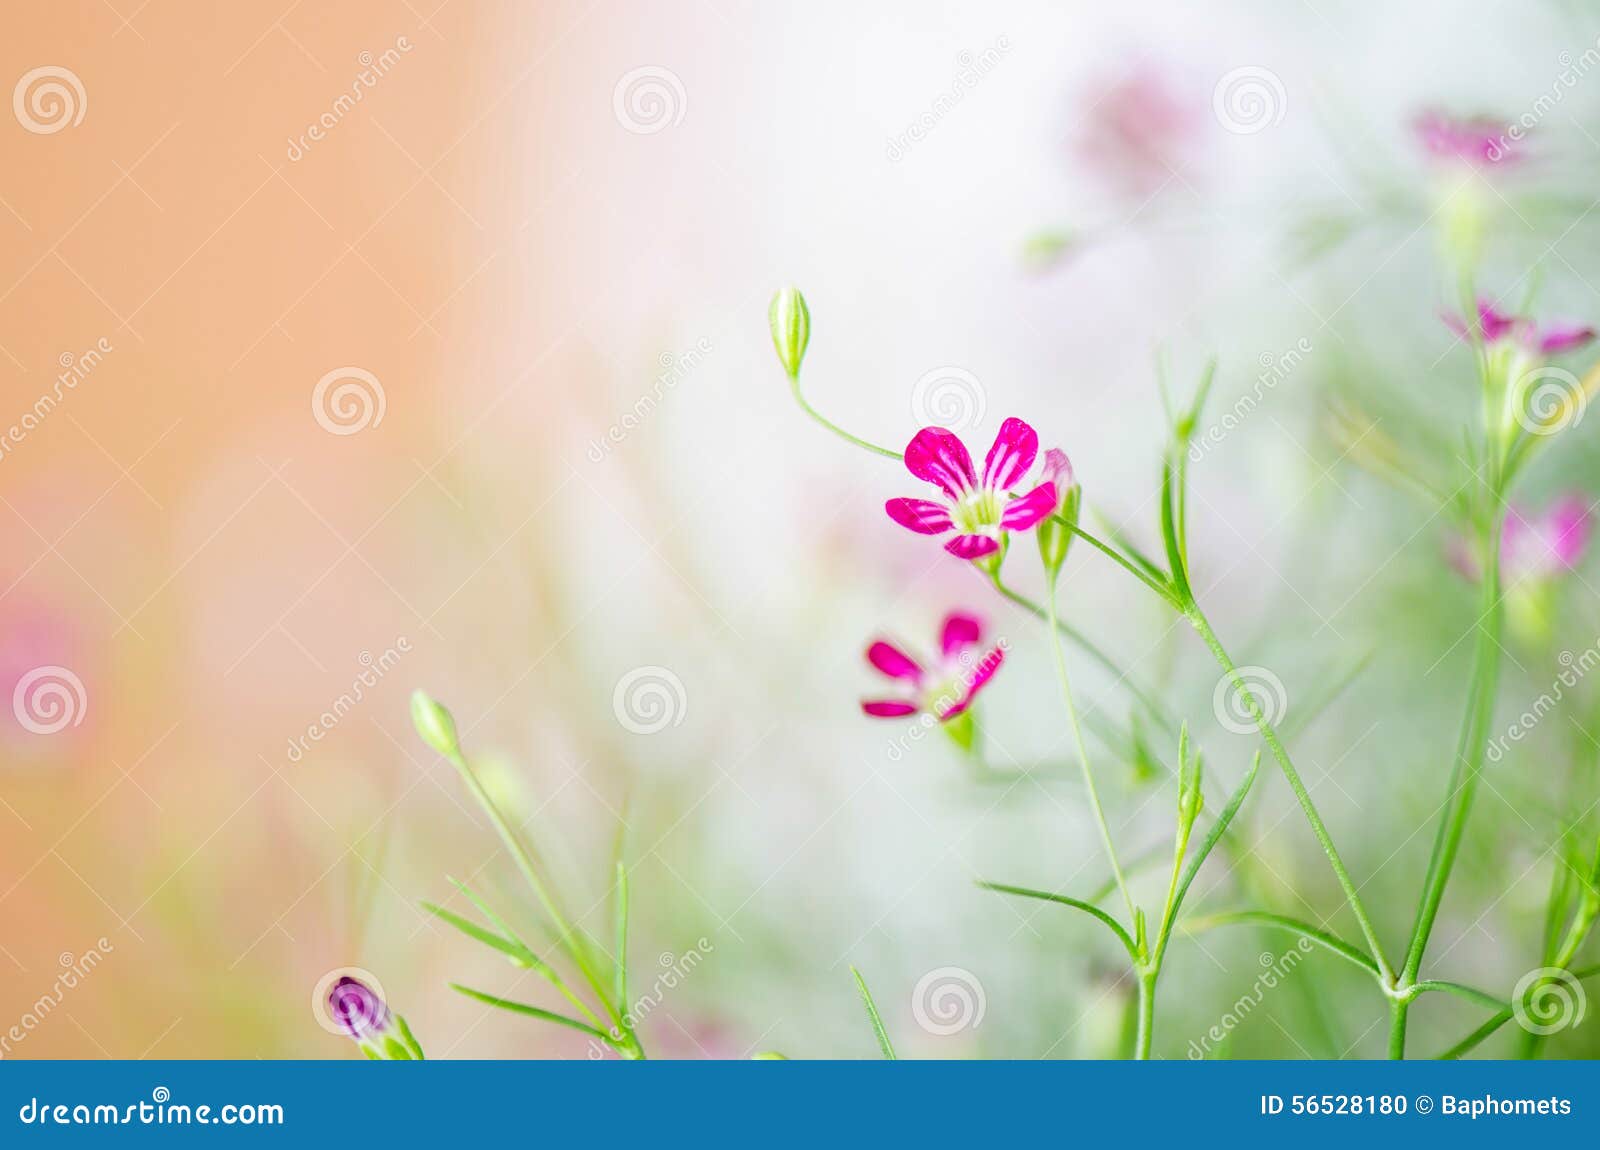 Blurred Flower Background, Abstract Blur Background Stock Photo - Image of  blur, foliage: 56528180